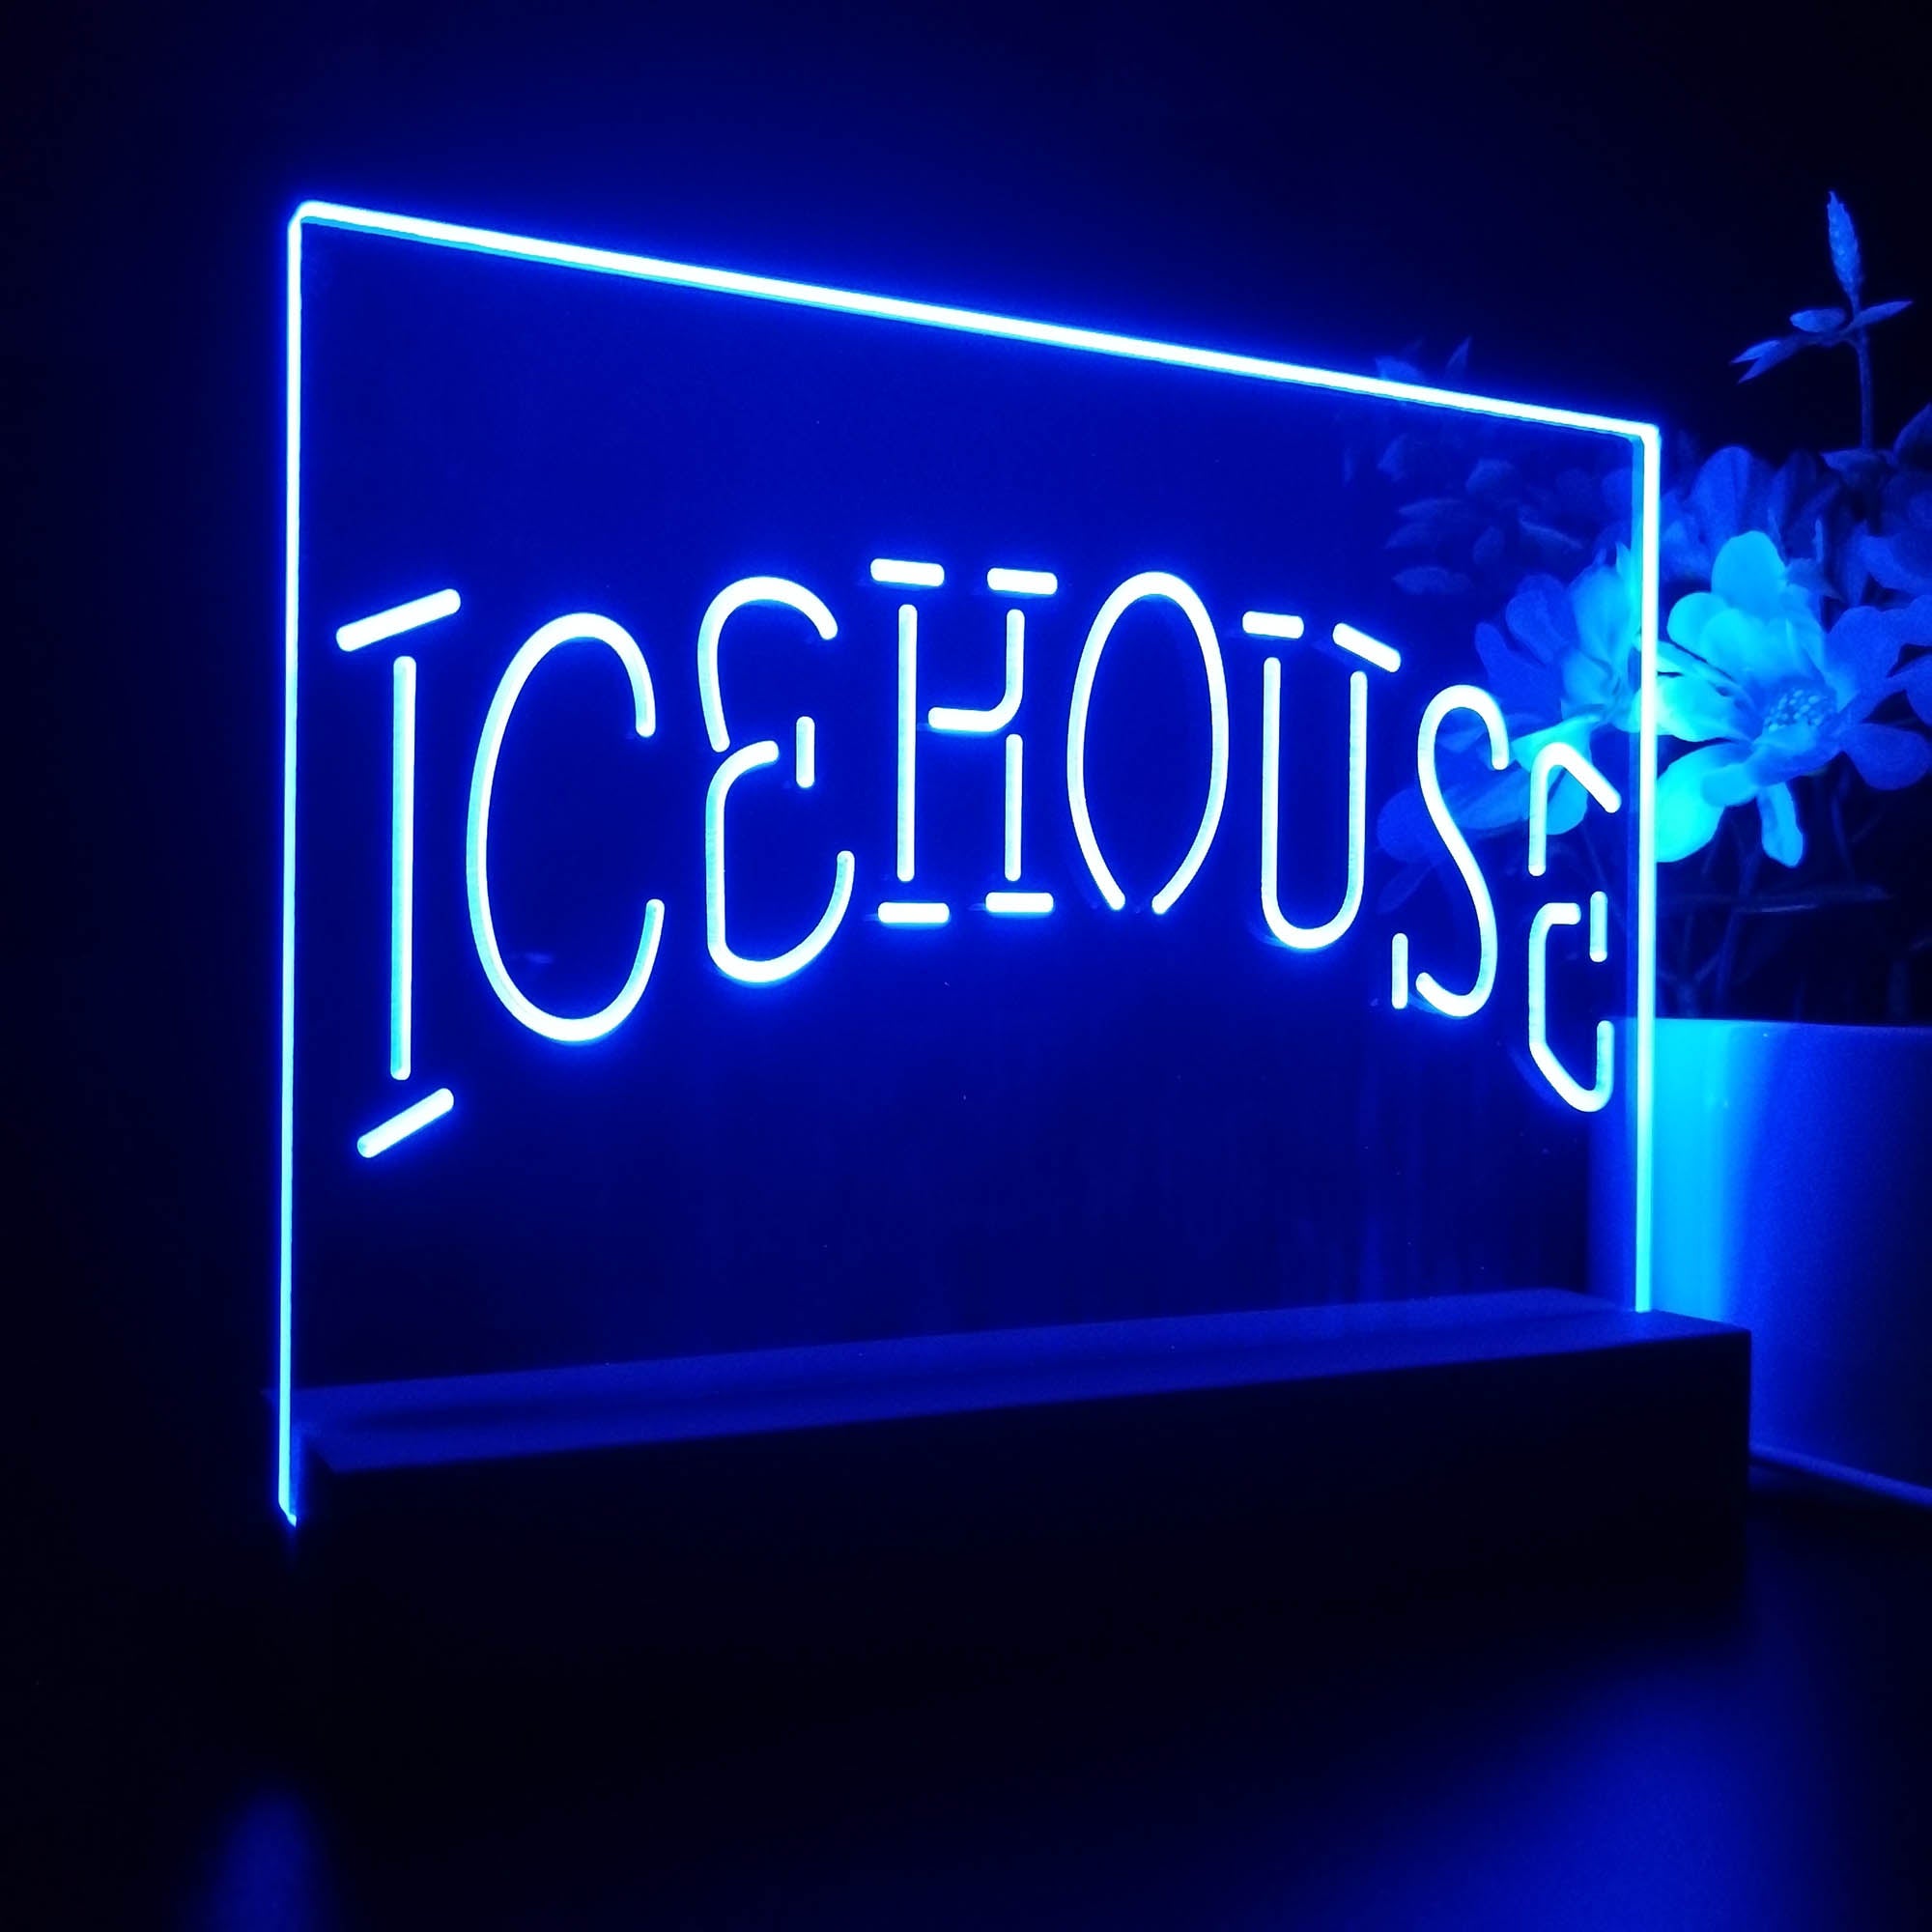 Icehouse Beer Neon Sign Pub Bar Lamp